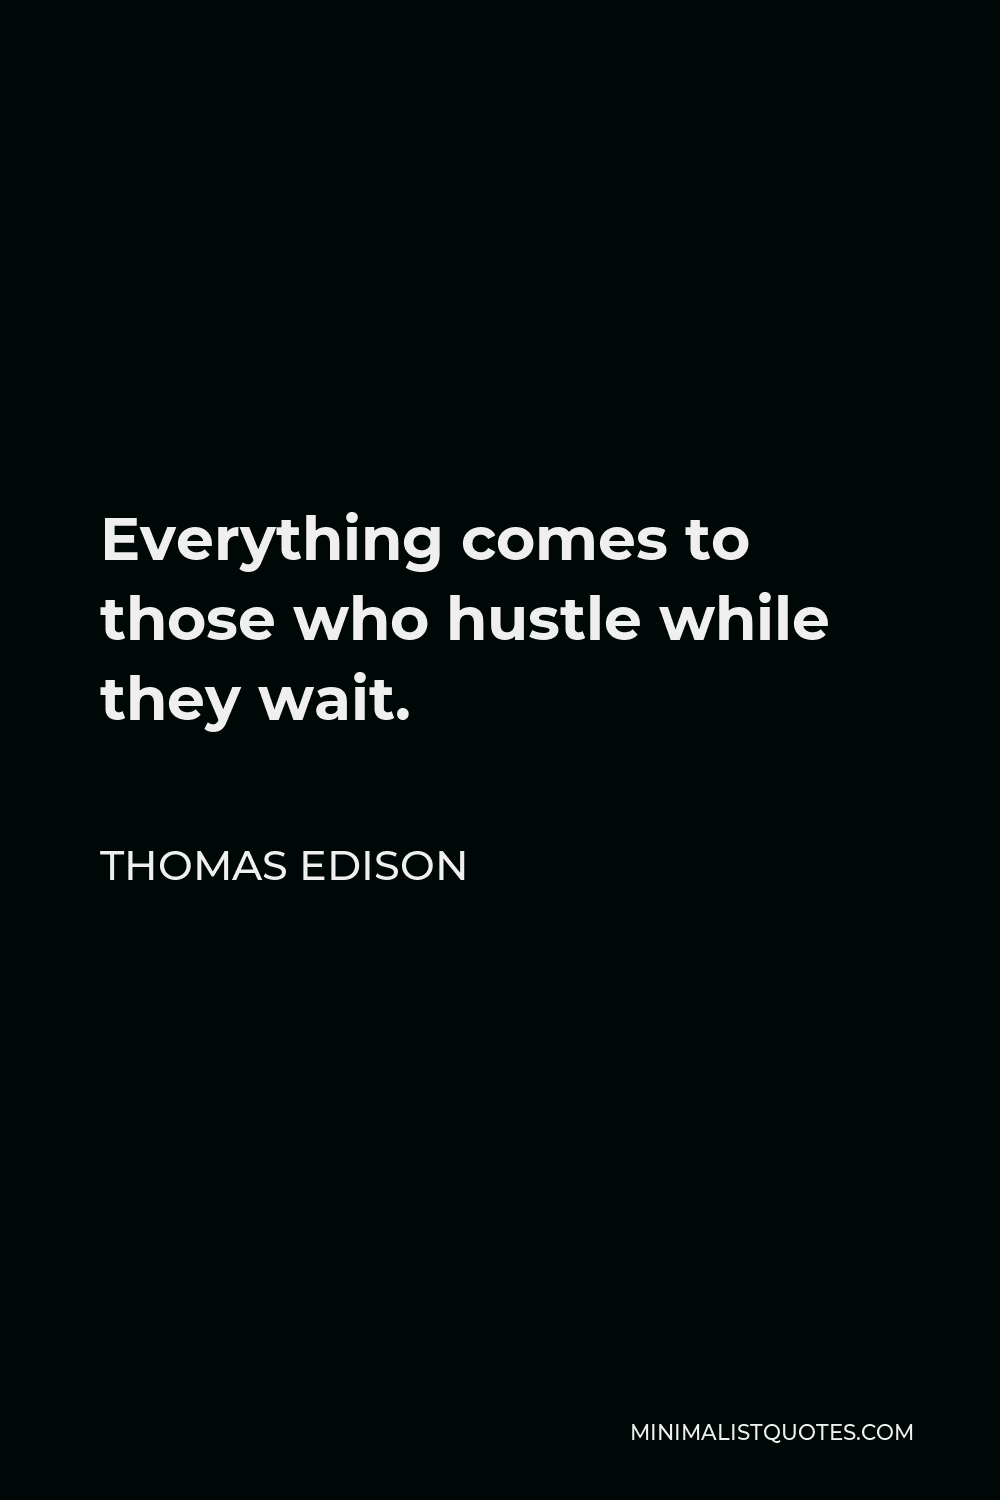 Thomas Edison Quote - Everything comes to those who hustle while they wait.